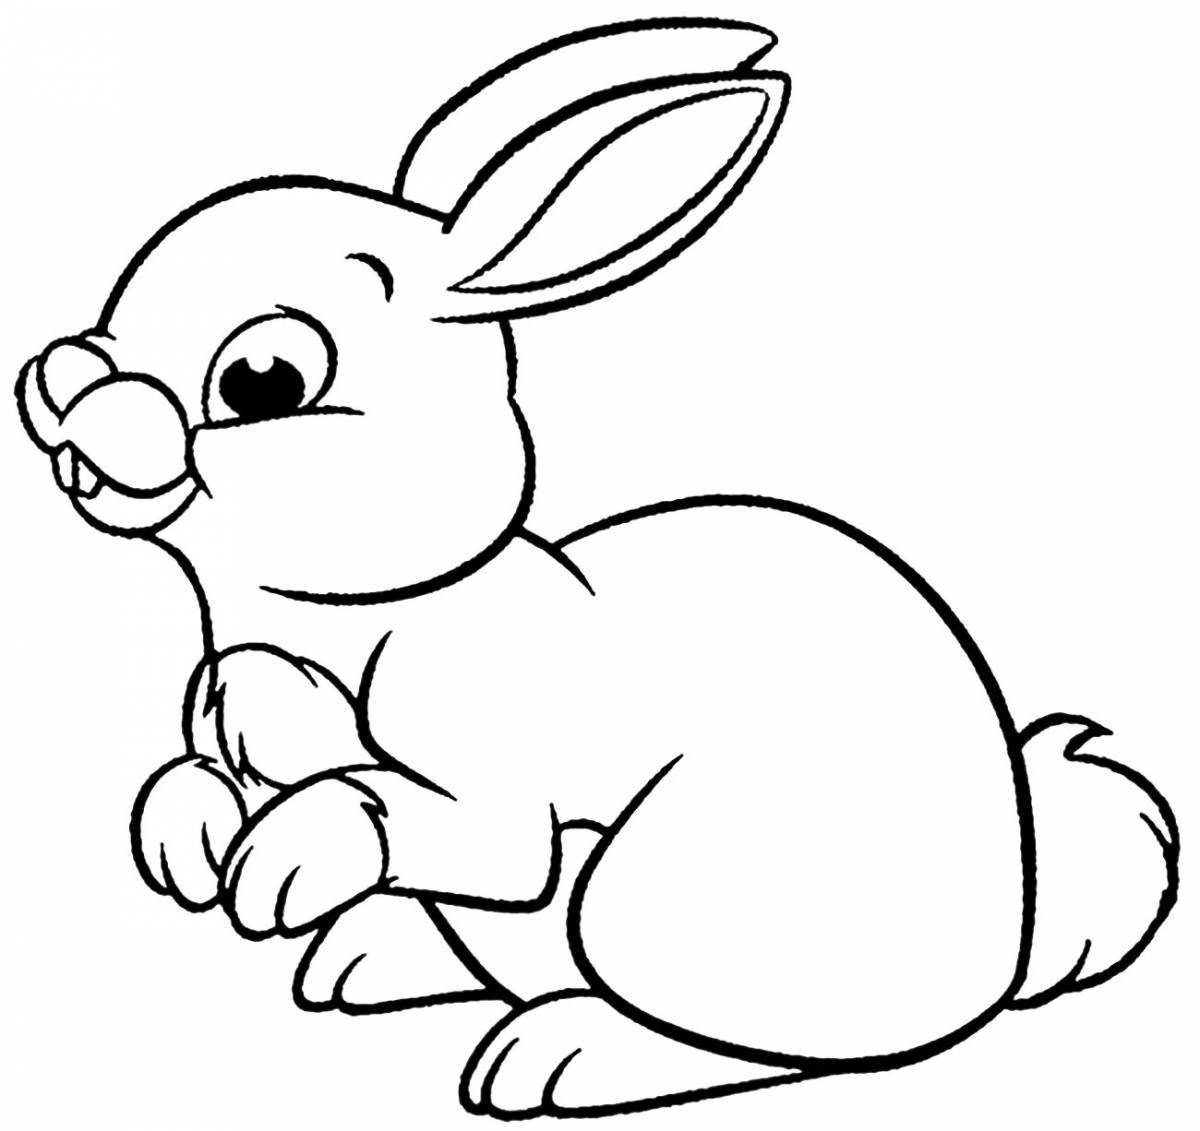 Coloring book magical hare for preschoolers